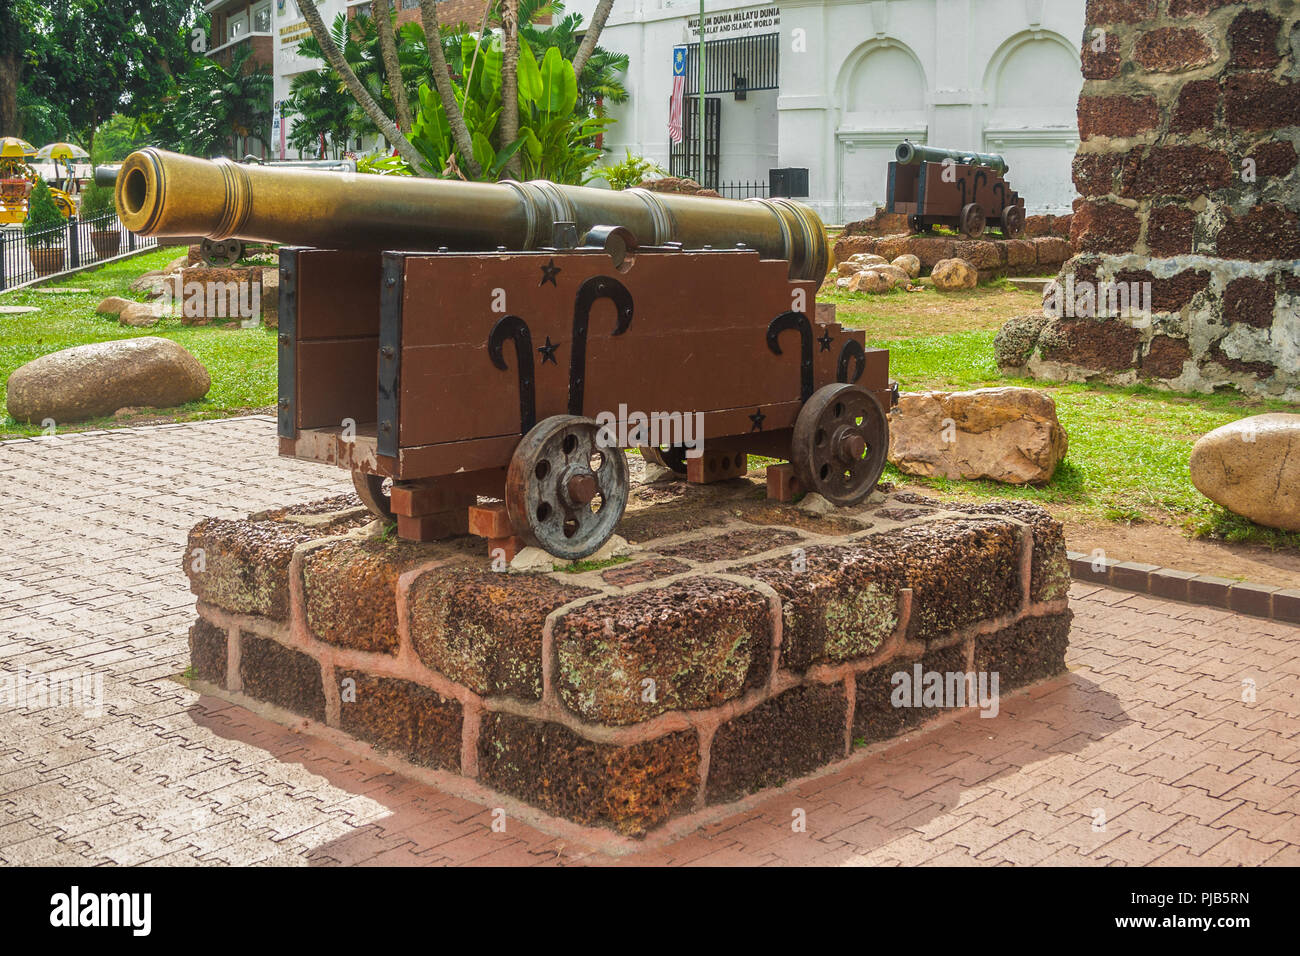 An old large Portuguese bronze cannon on a red sandstone platform at A Famosa, a former Portuguese fortress located in Malacca, Malaysia. Stock Photo